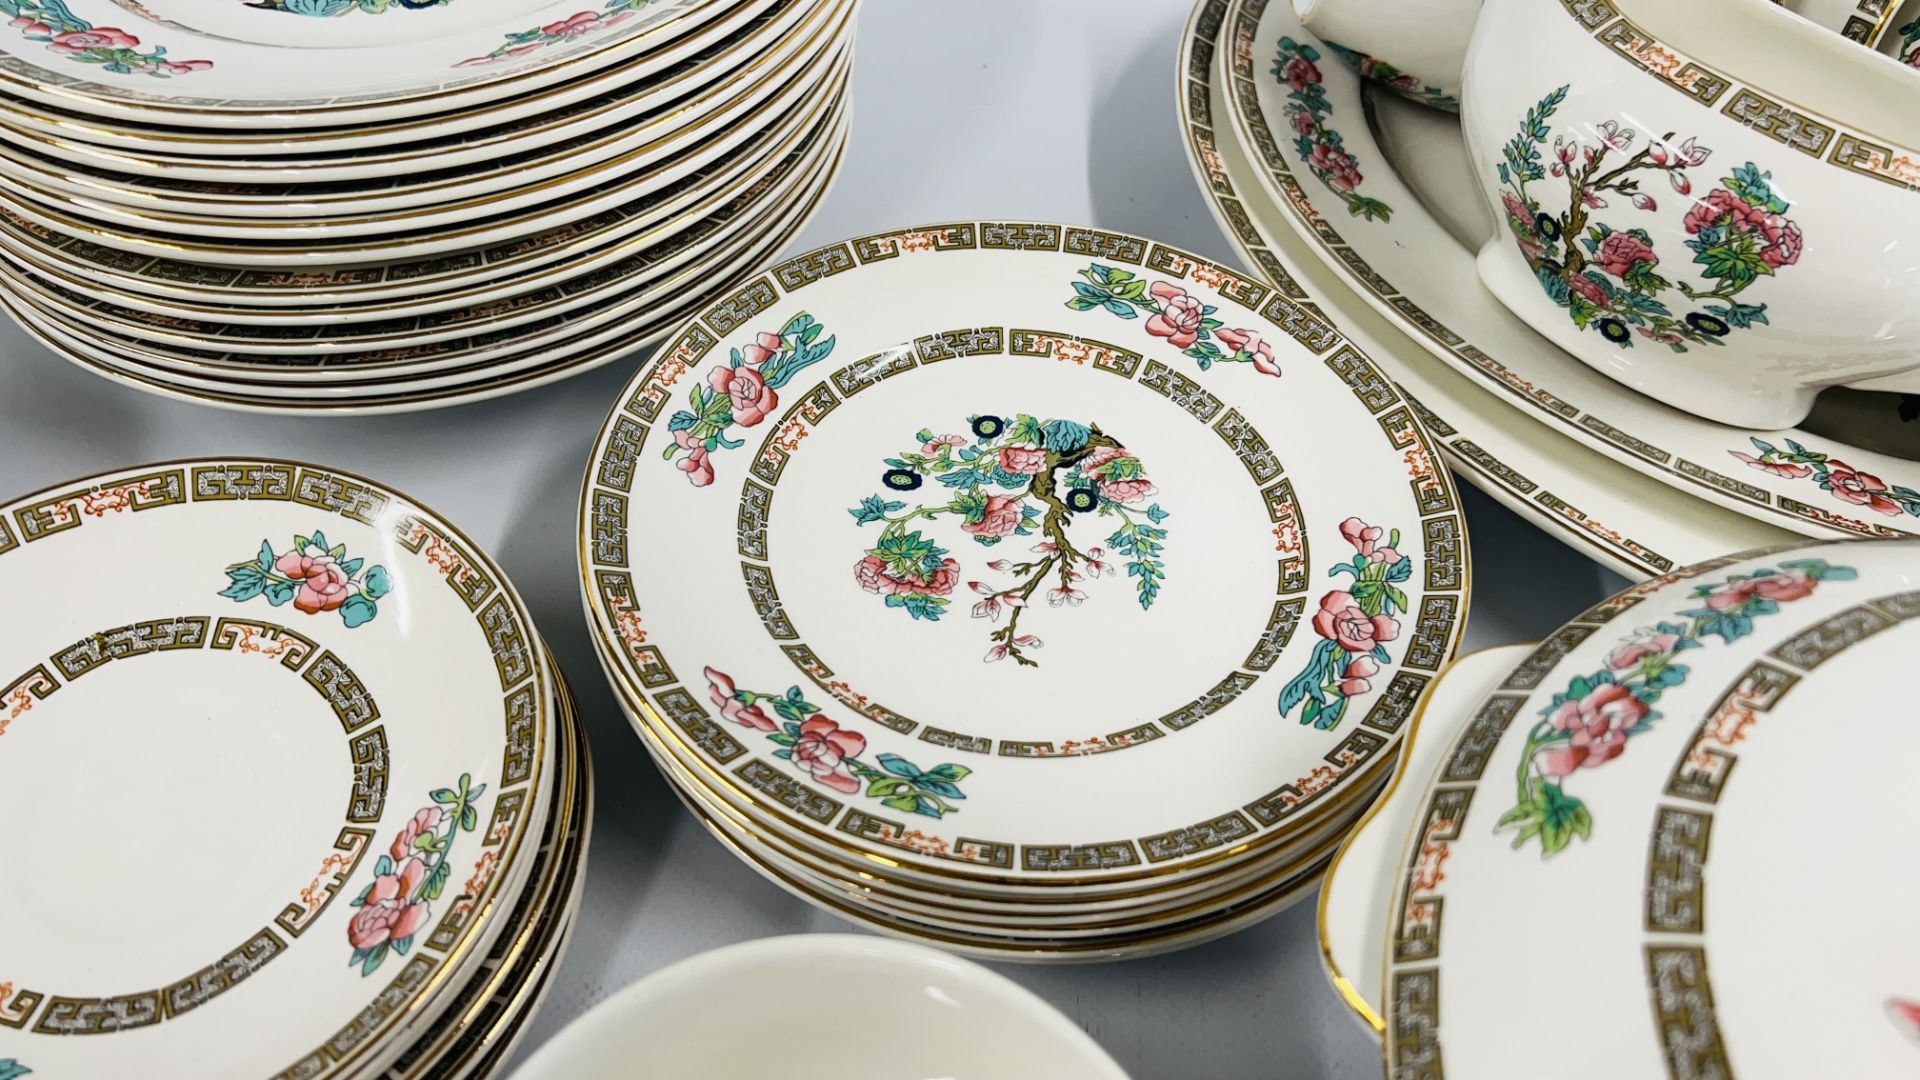 55 PIECES OF WEDGEWOOD INDIAN TREE DINNERWARE INCLUDING PLATES, CUPS, SAUCERS, TUREENS ETC. - Image 5 of 10